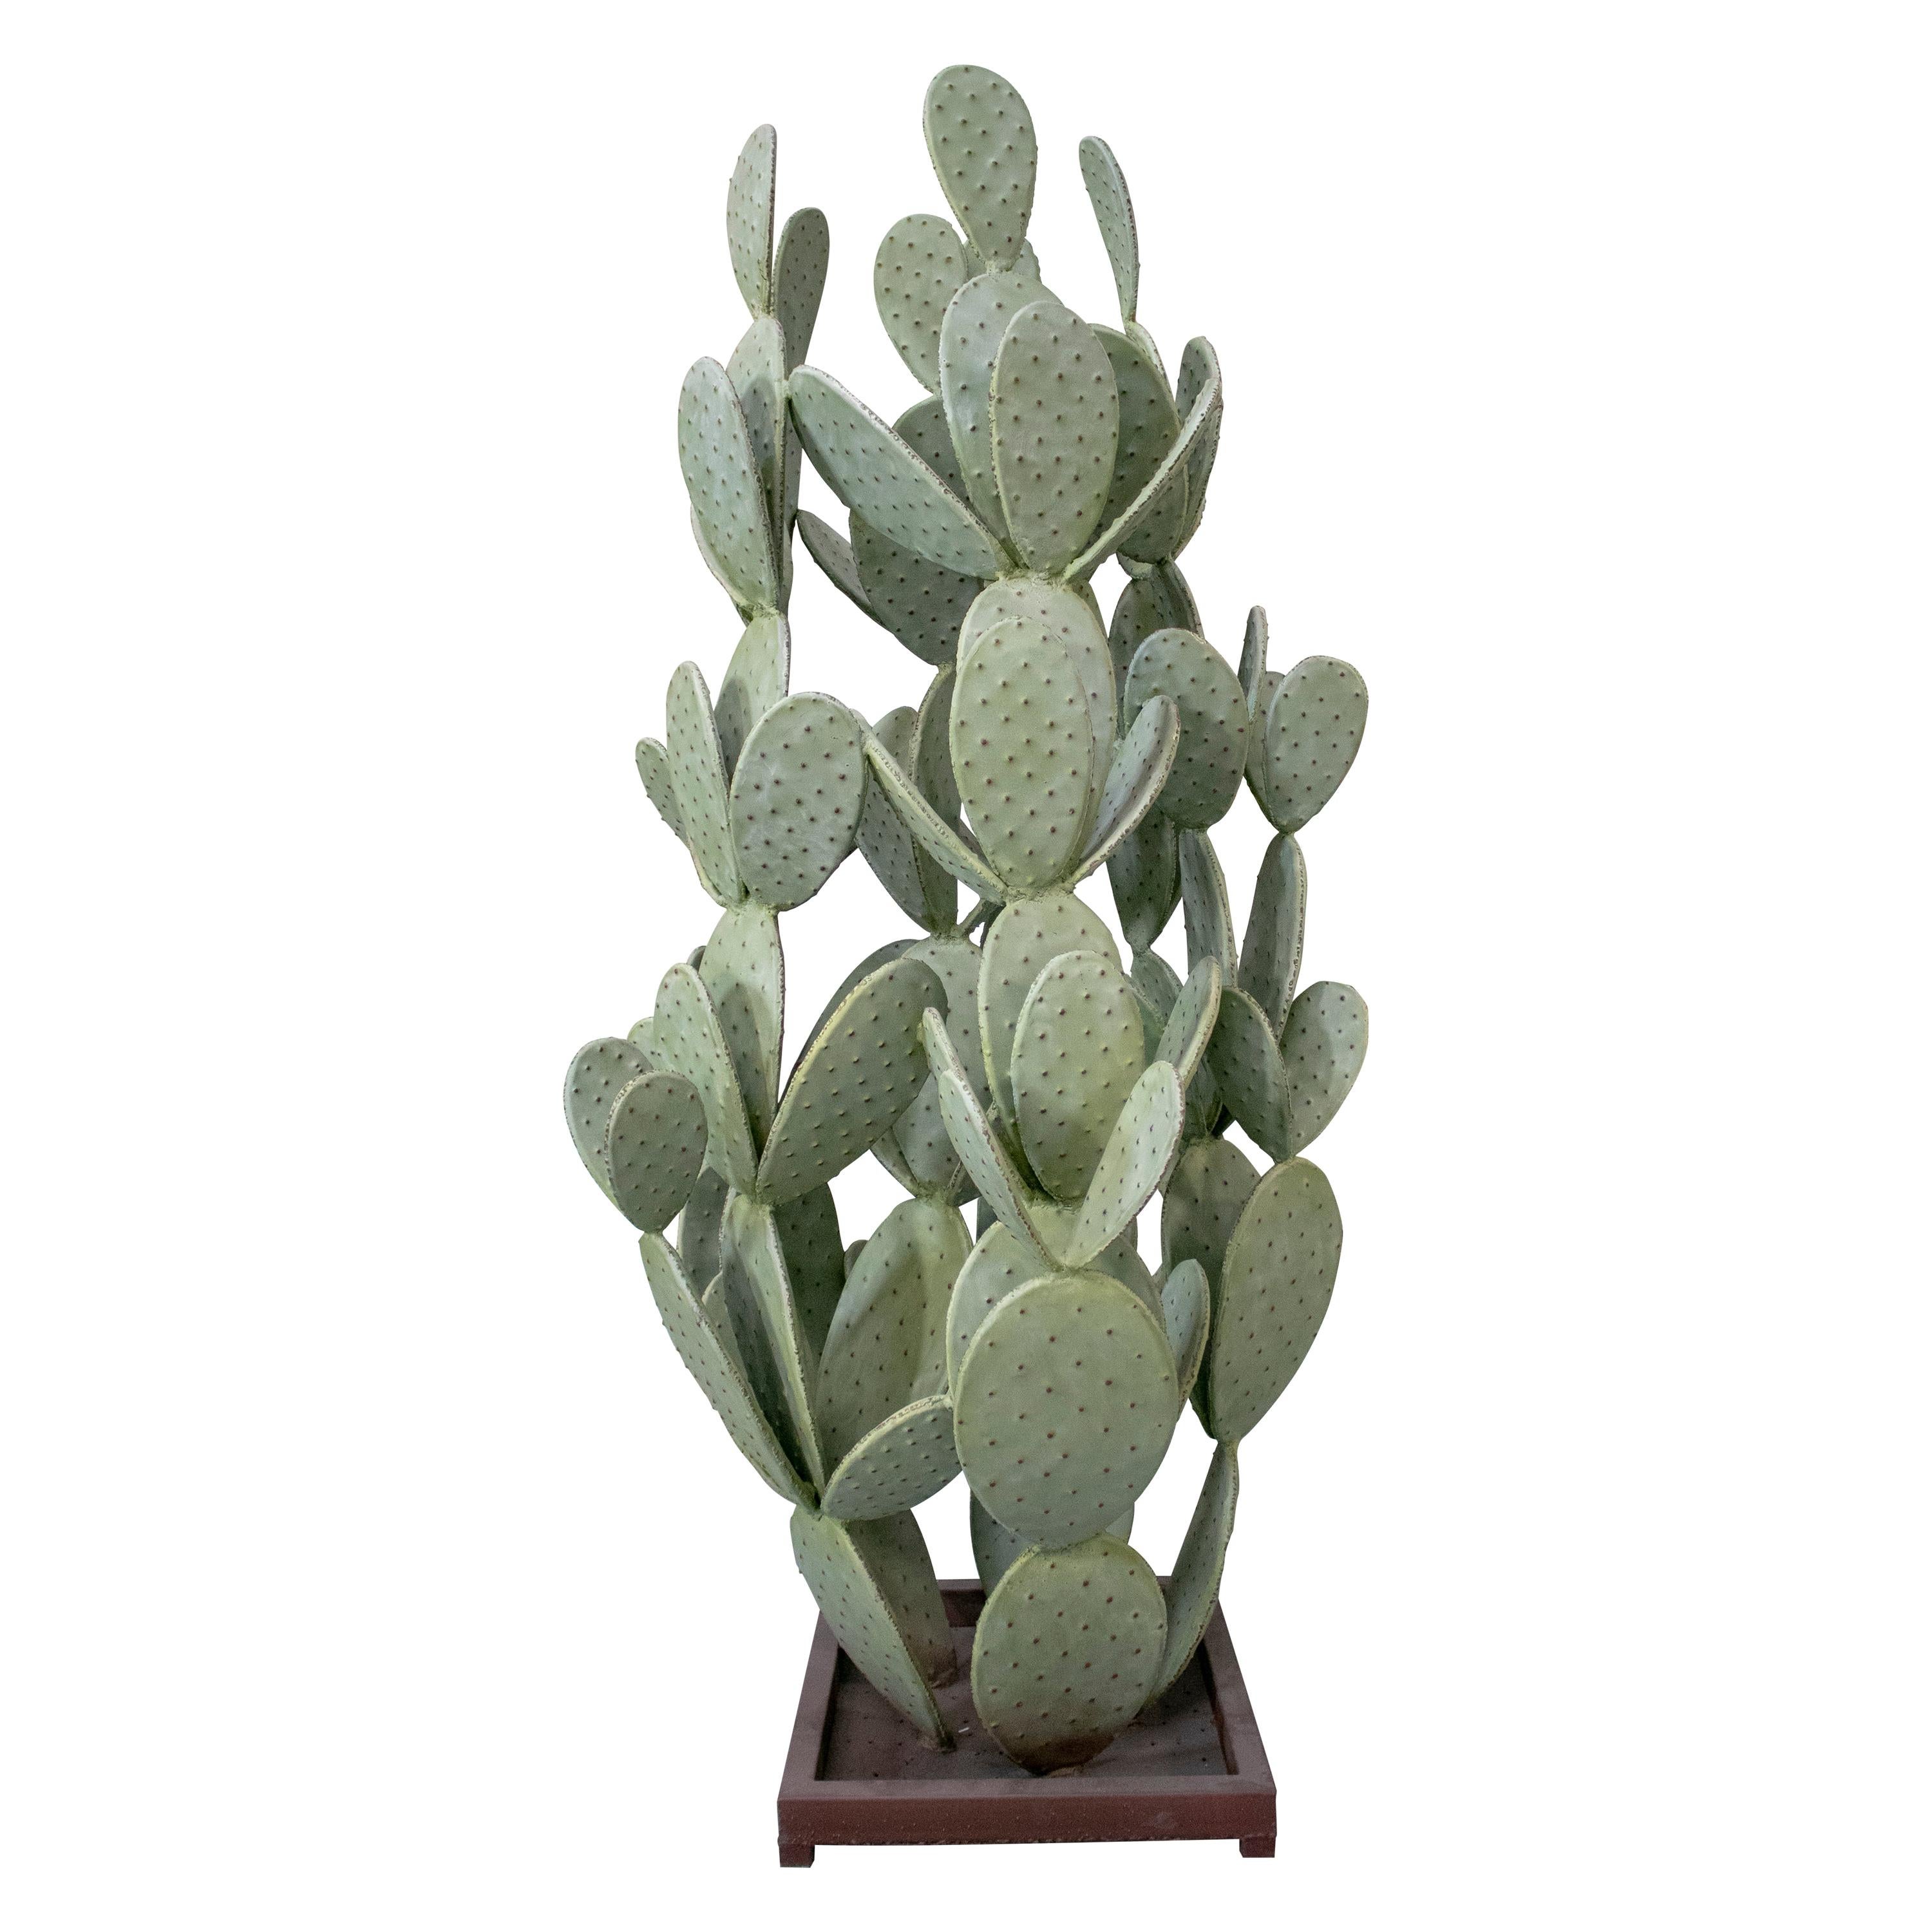 1990s French Iron Green Cactus Sculpture